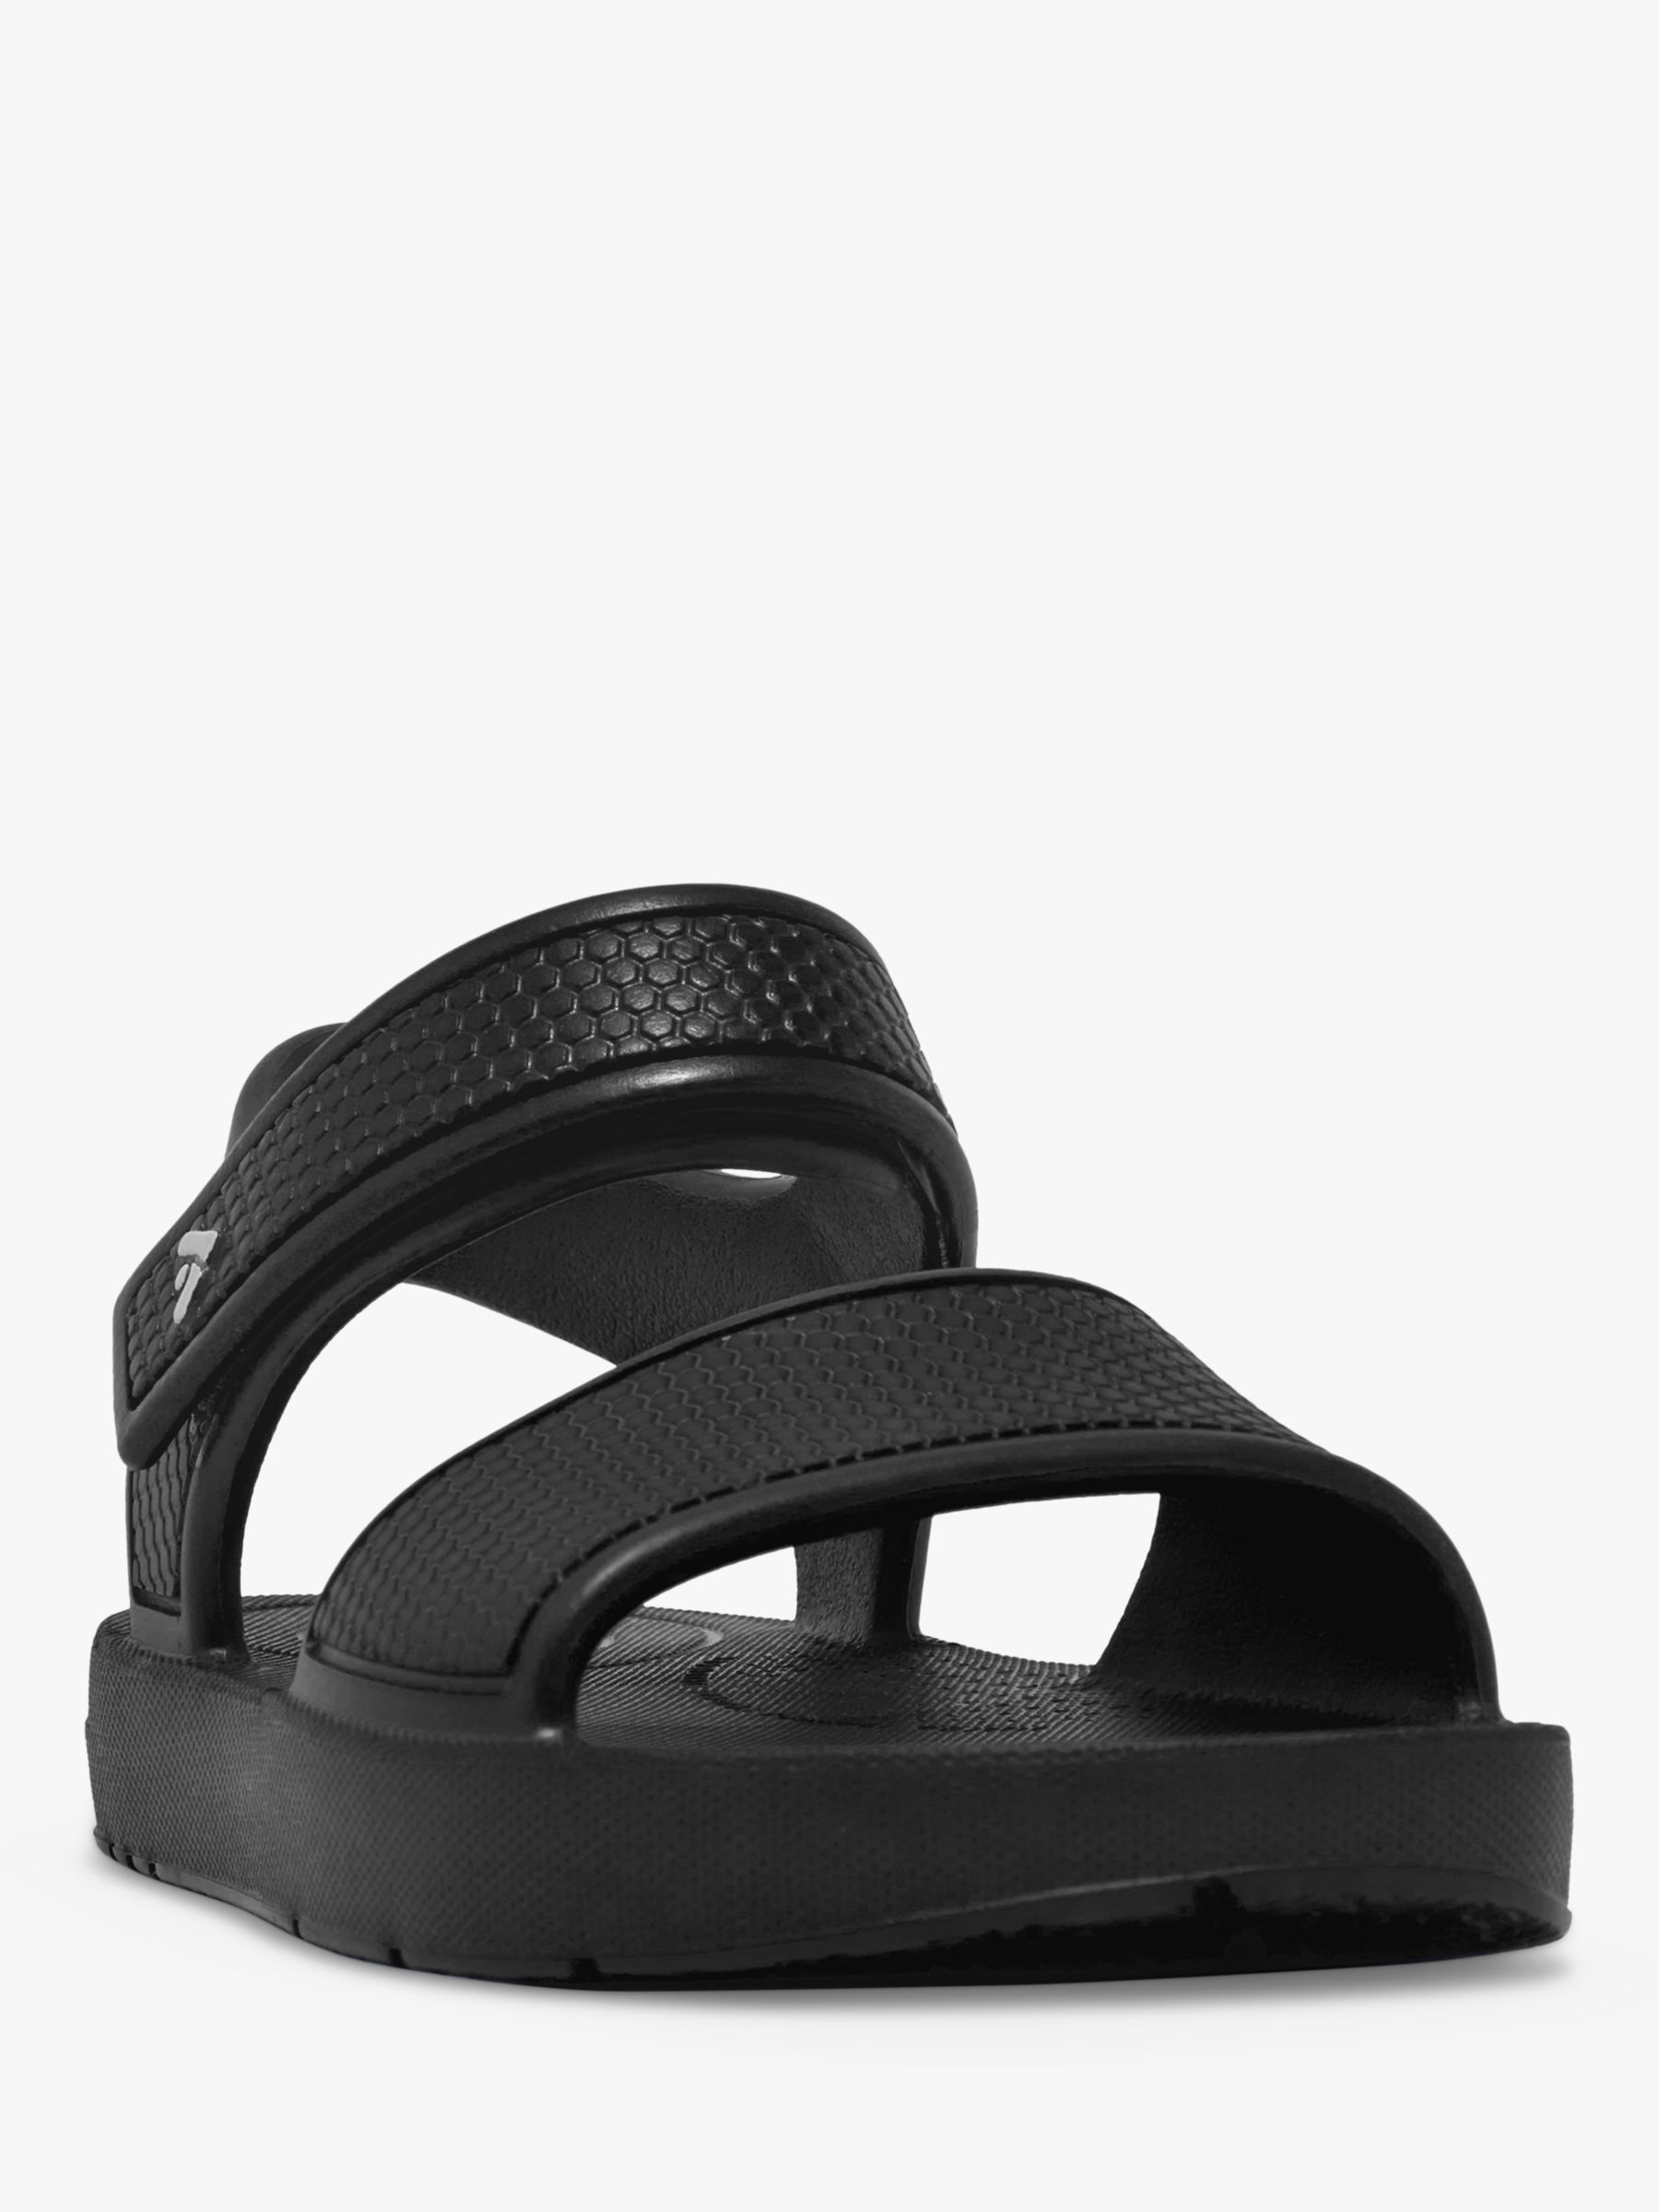 FitFlop Kids' Iqushion Backstrap Pearlised Sandals, Black, C6